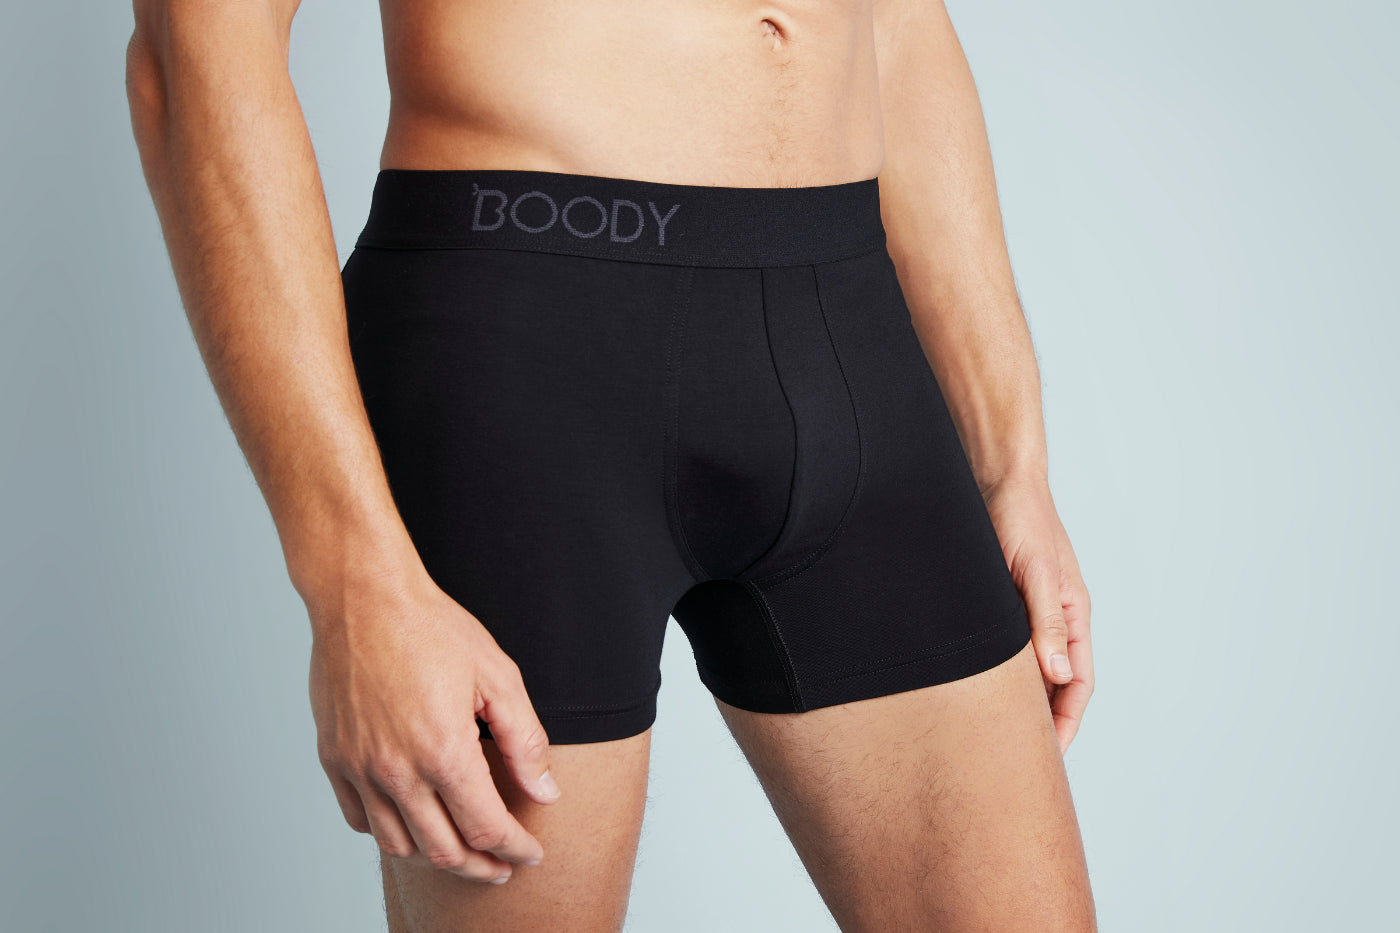 The Best Underwear For Men - The Ultimate Guide